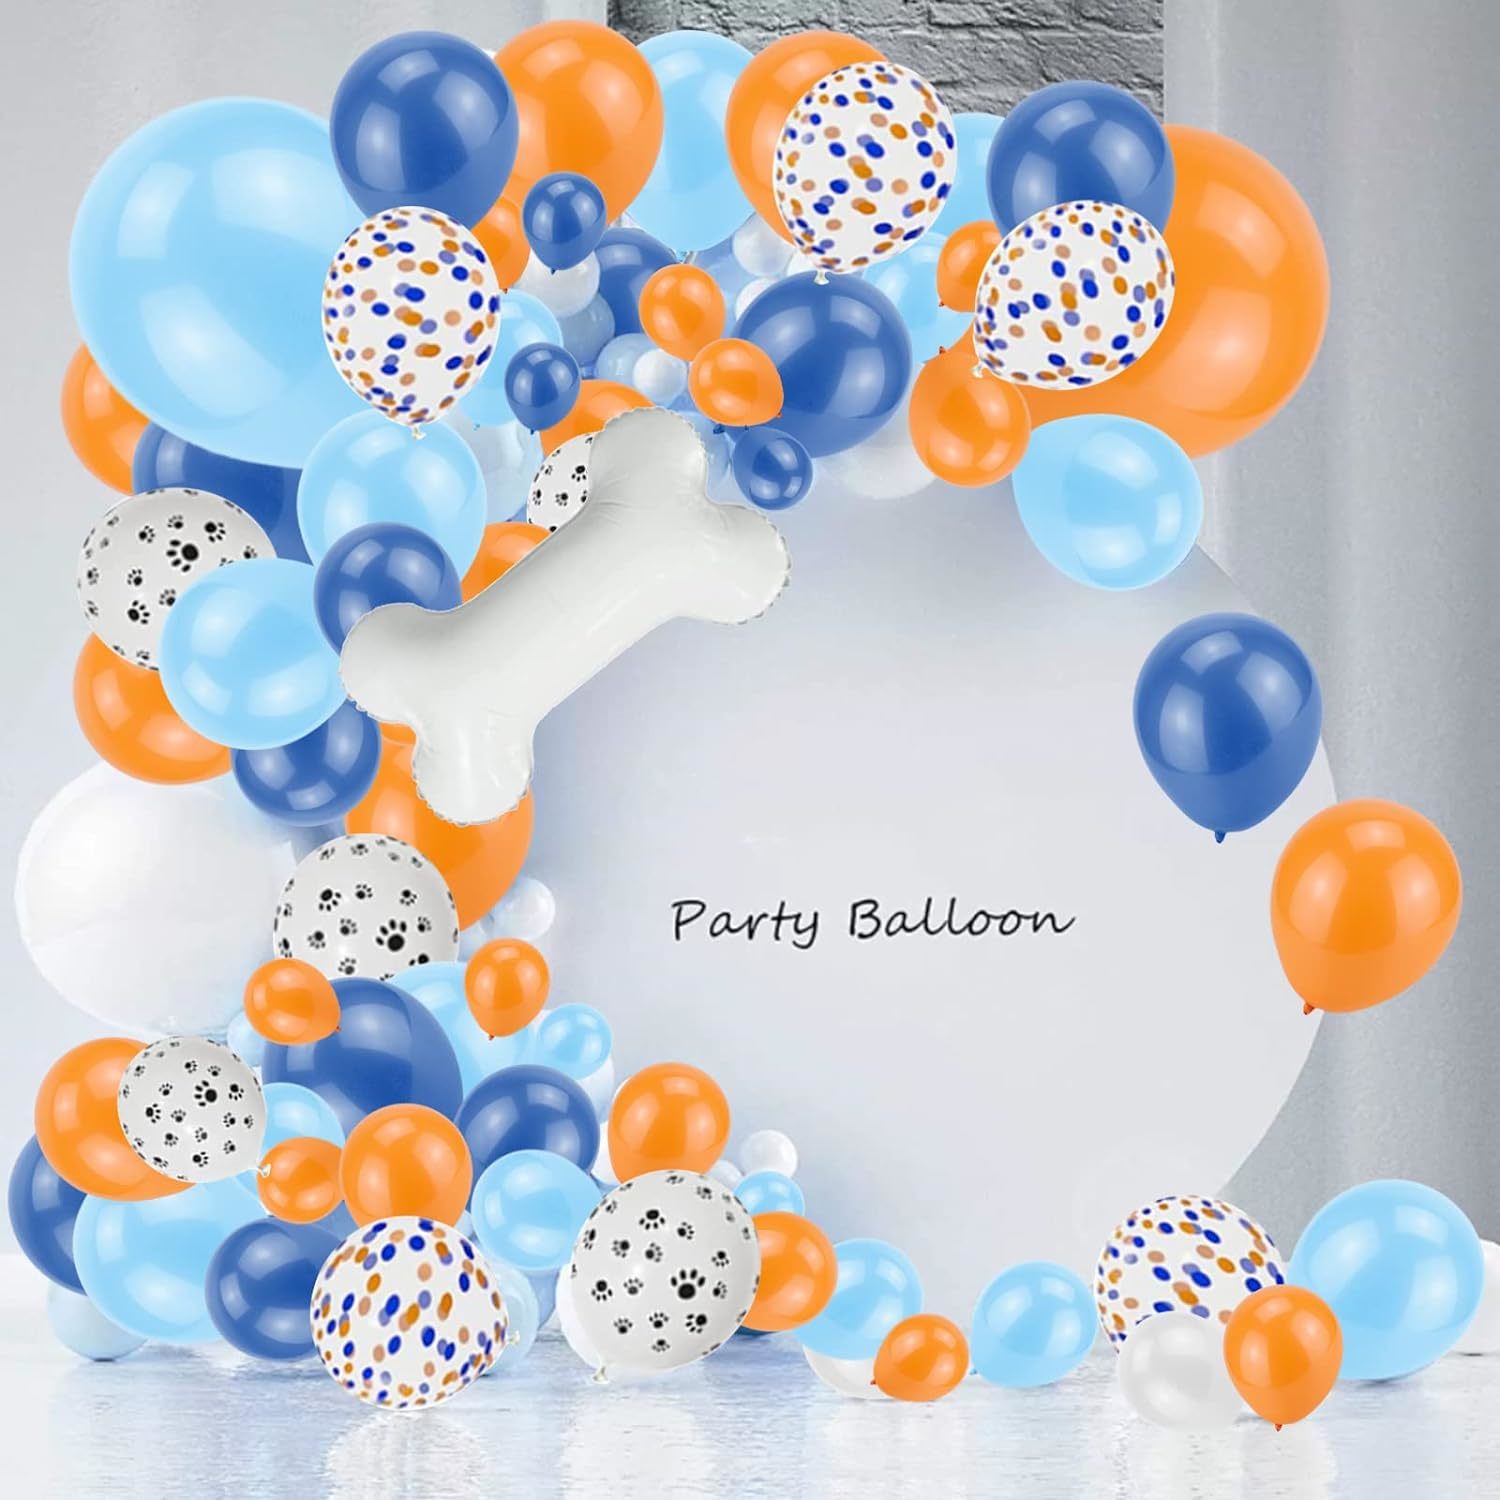 Blue Birthday Party Supplies, 121Pcs Blue Party Decorations, Dog Paw Balloons Ga - $24.99